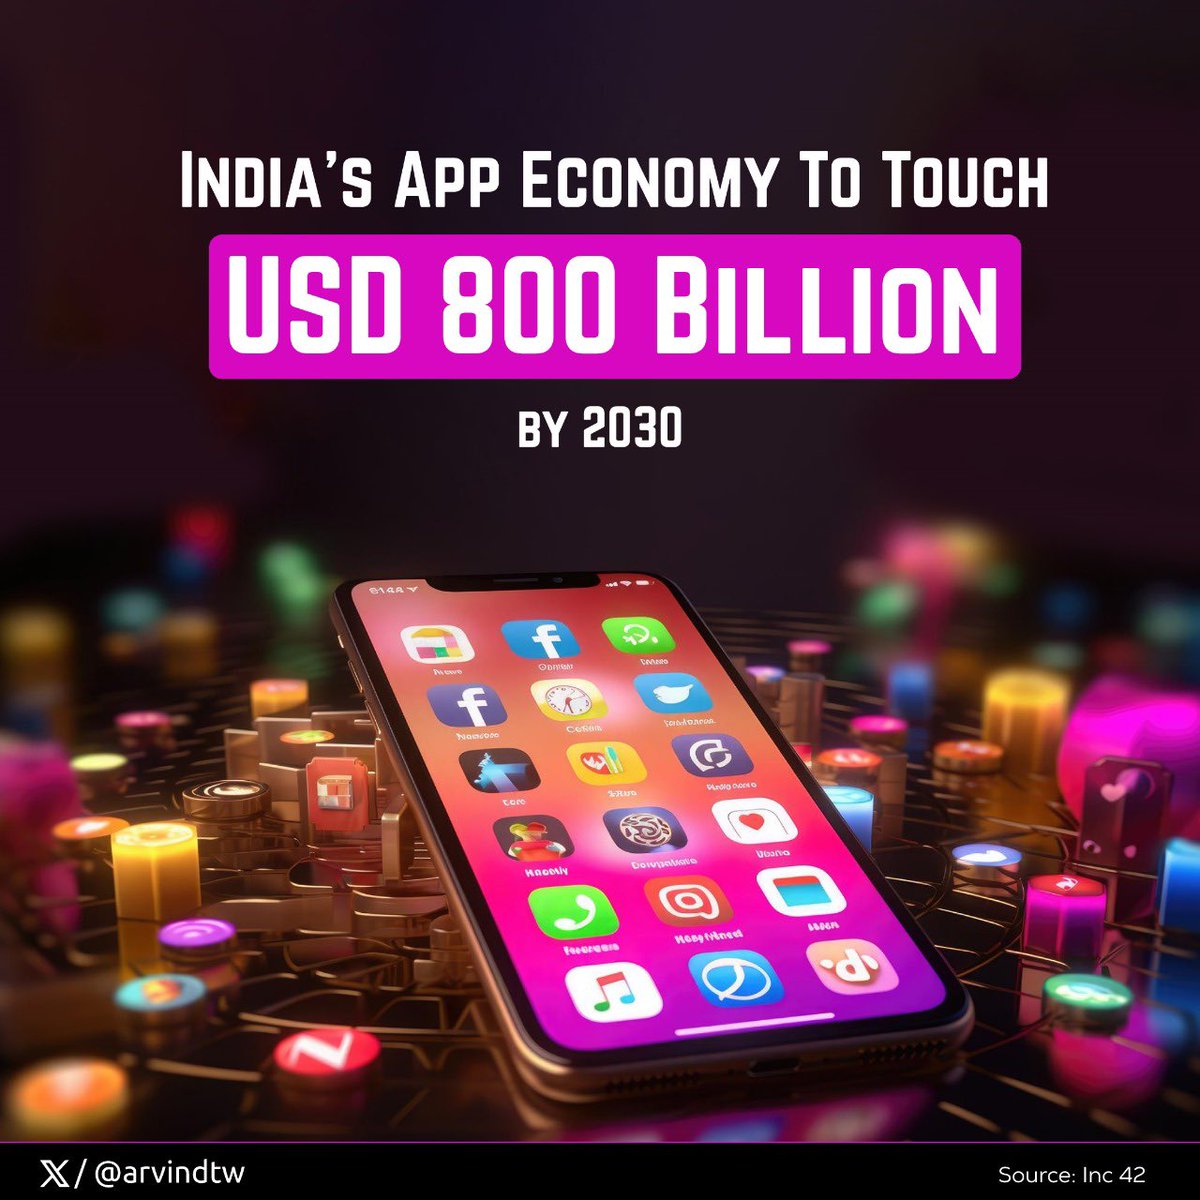 #Apps are an integral part of the Indian digital economy. This significant growth in the app economy can be attributed to the multiplier effect of #smartphone users, #5G penetration and overall economic expansion. @inc42 @GoI_MeitY